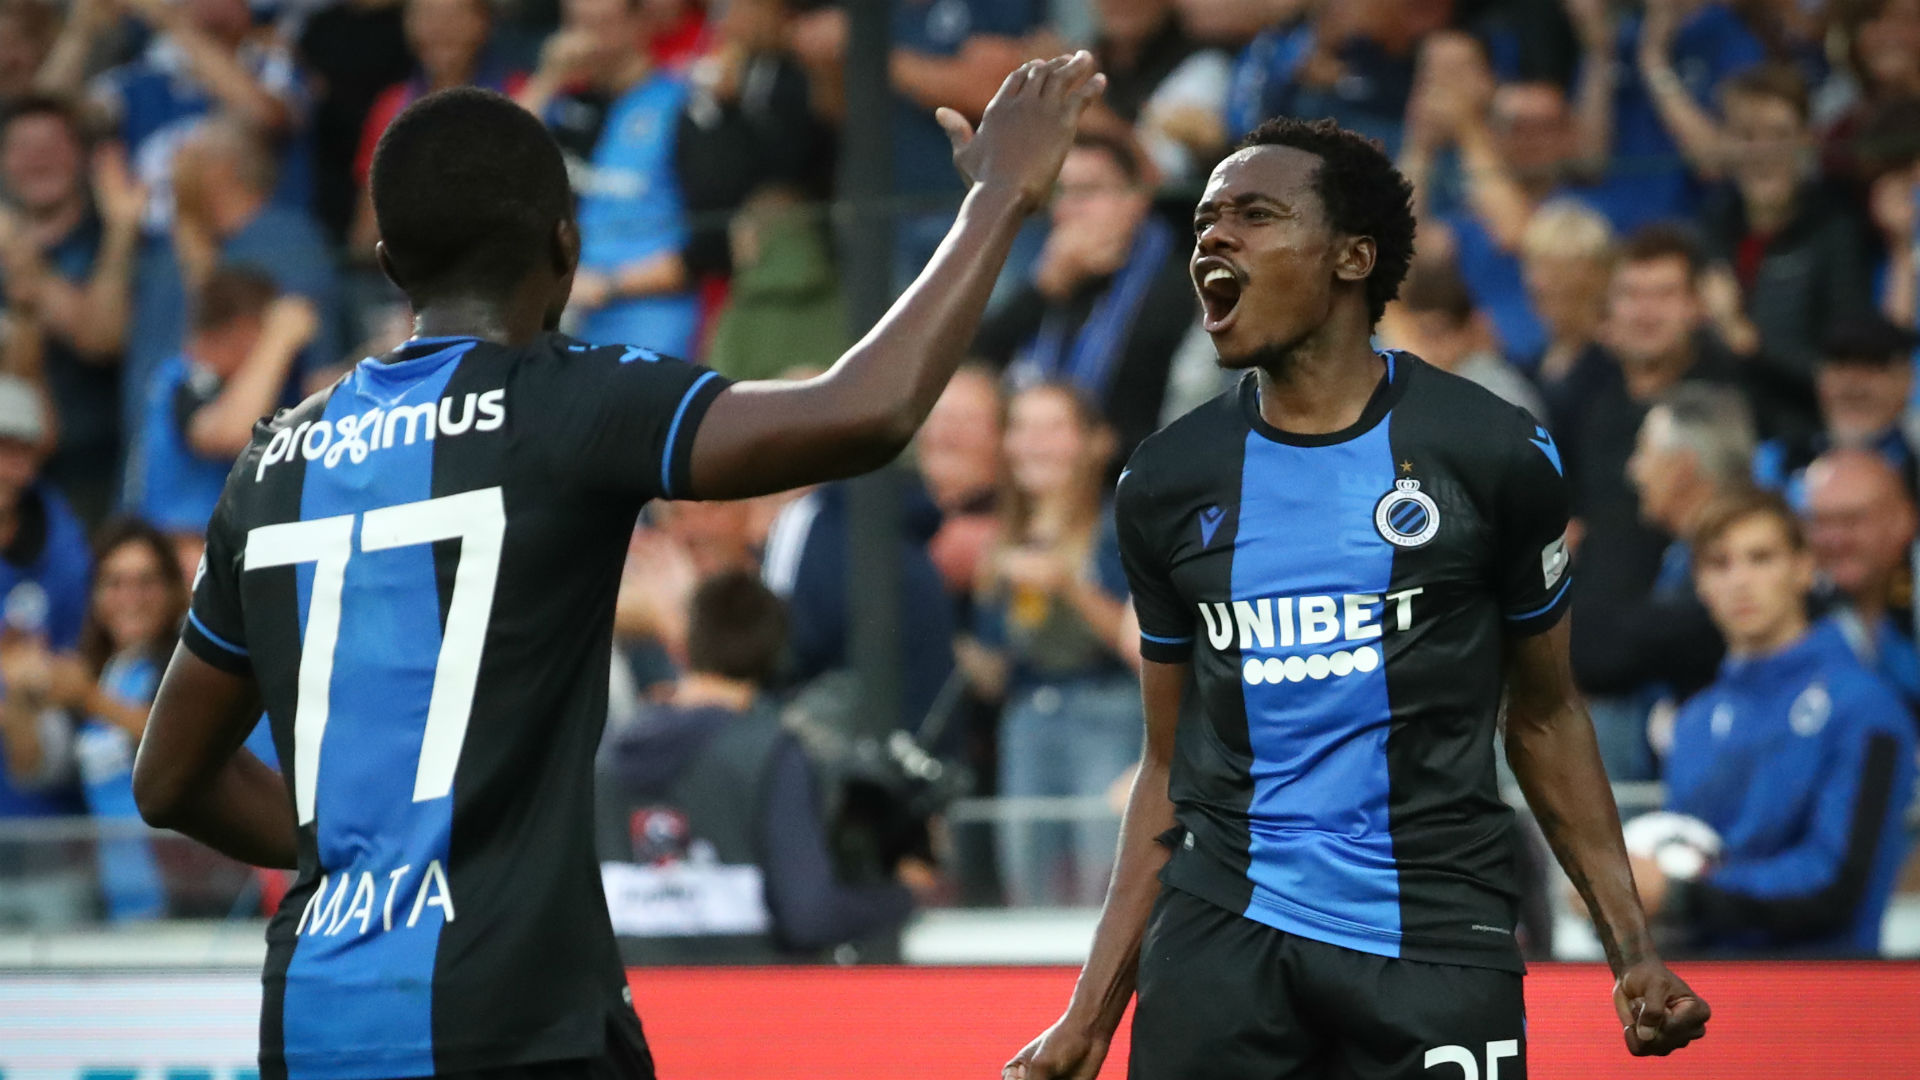 South Africa attacker Percy Tau makes Uefa Champions League debut in Club Brugge's win over Dynamo Kyiv